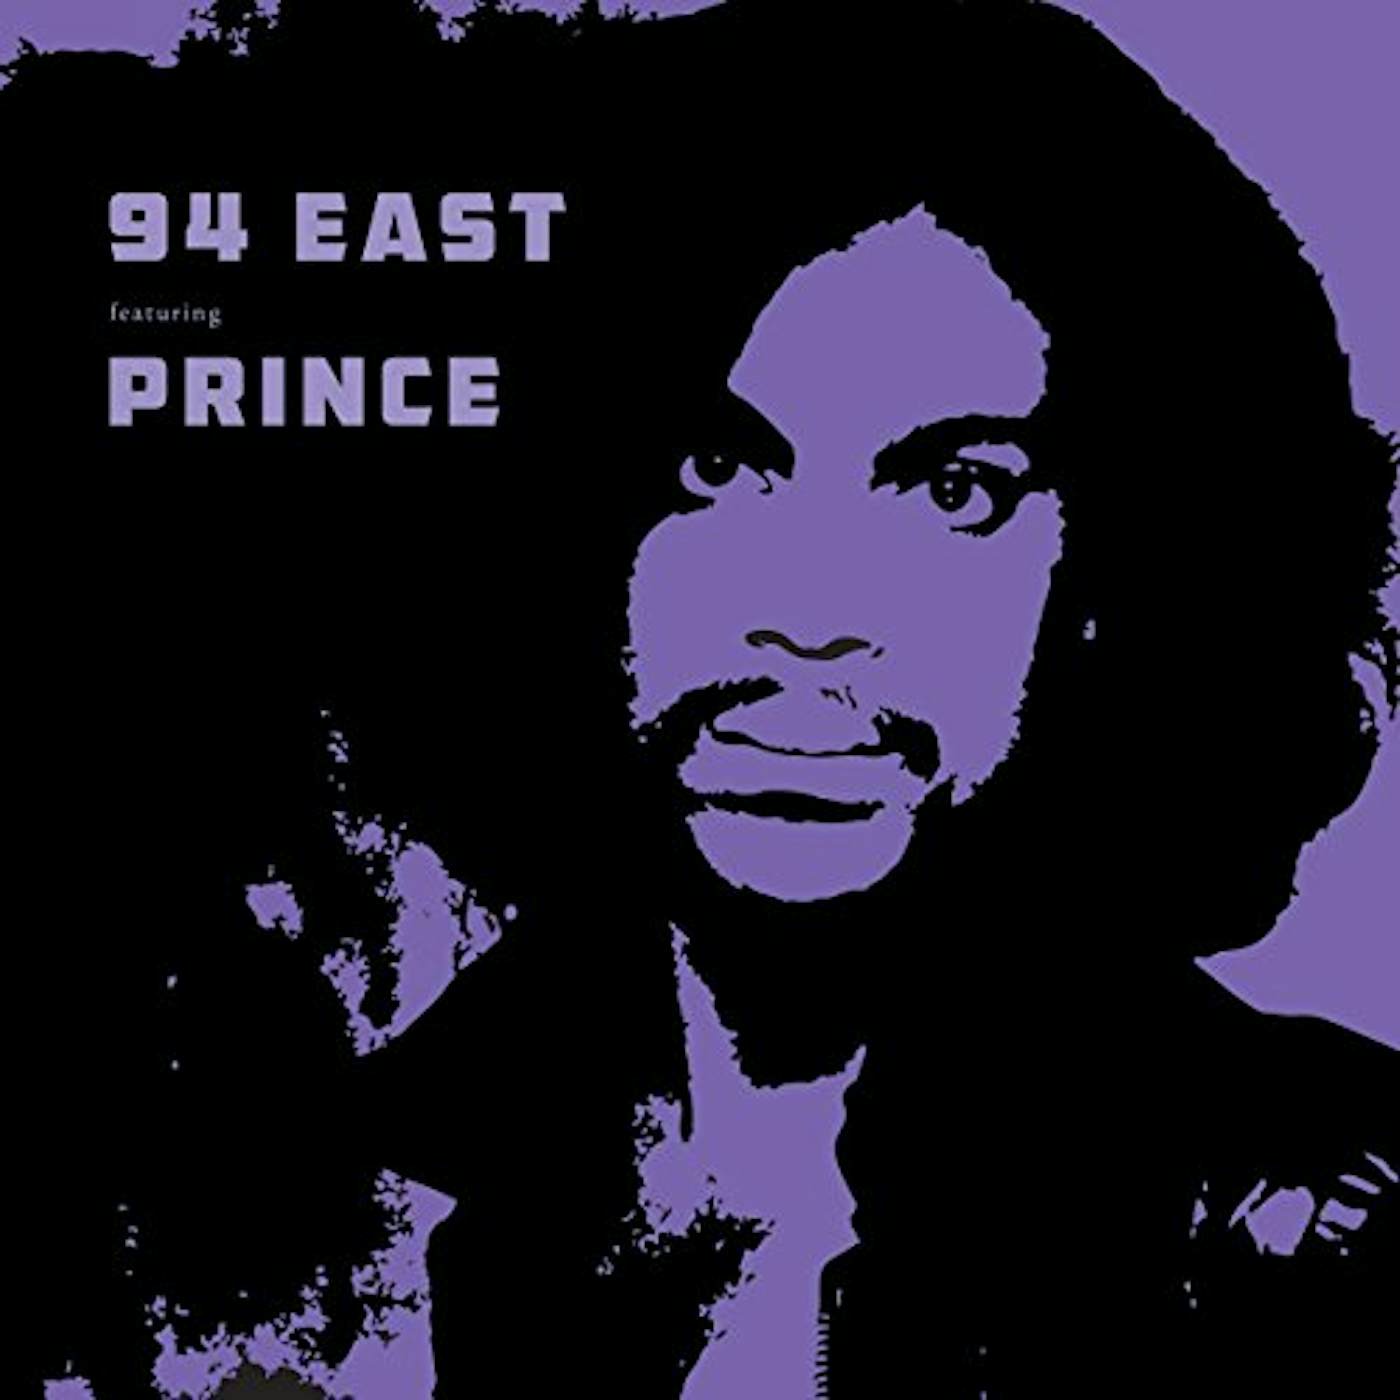 94 EAST FEATURING PRINCE CD